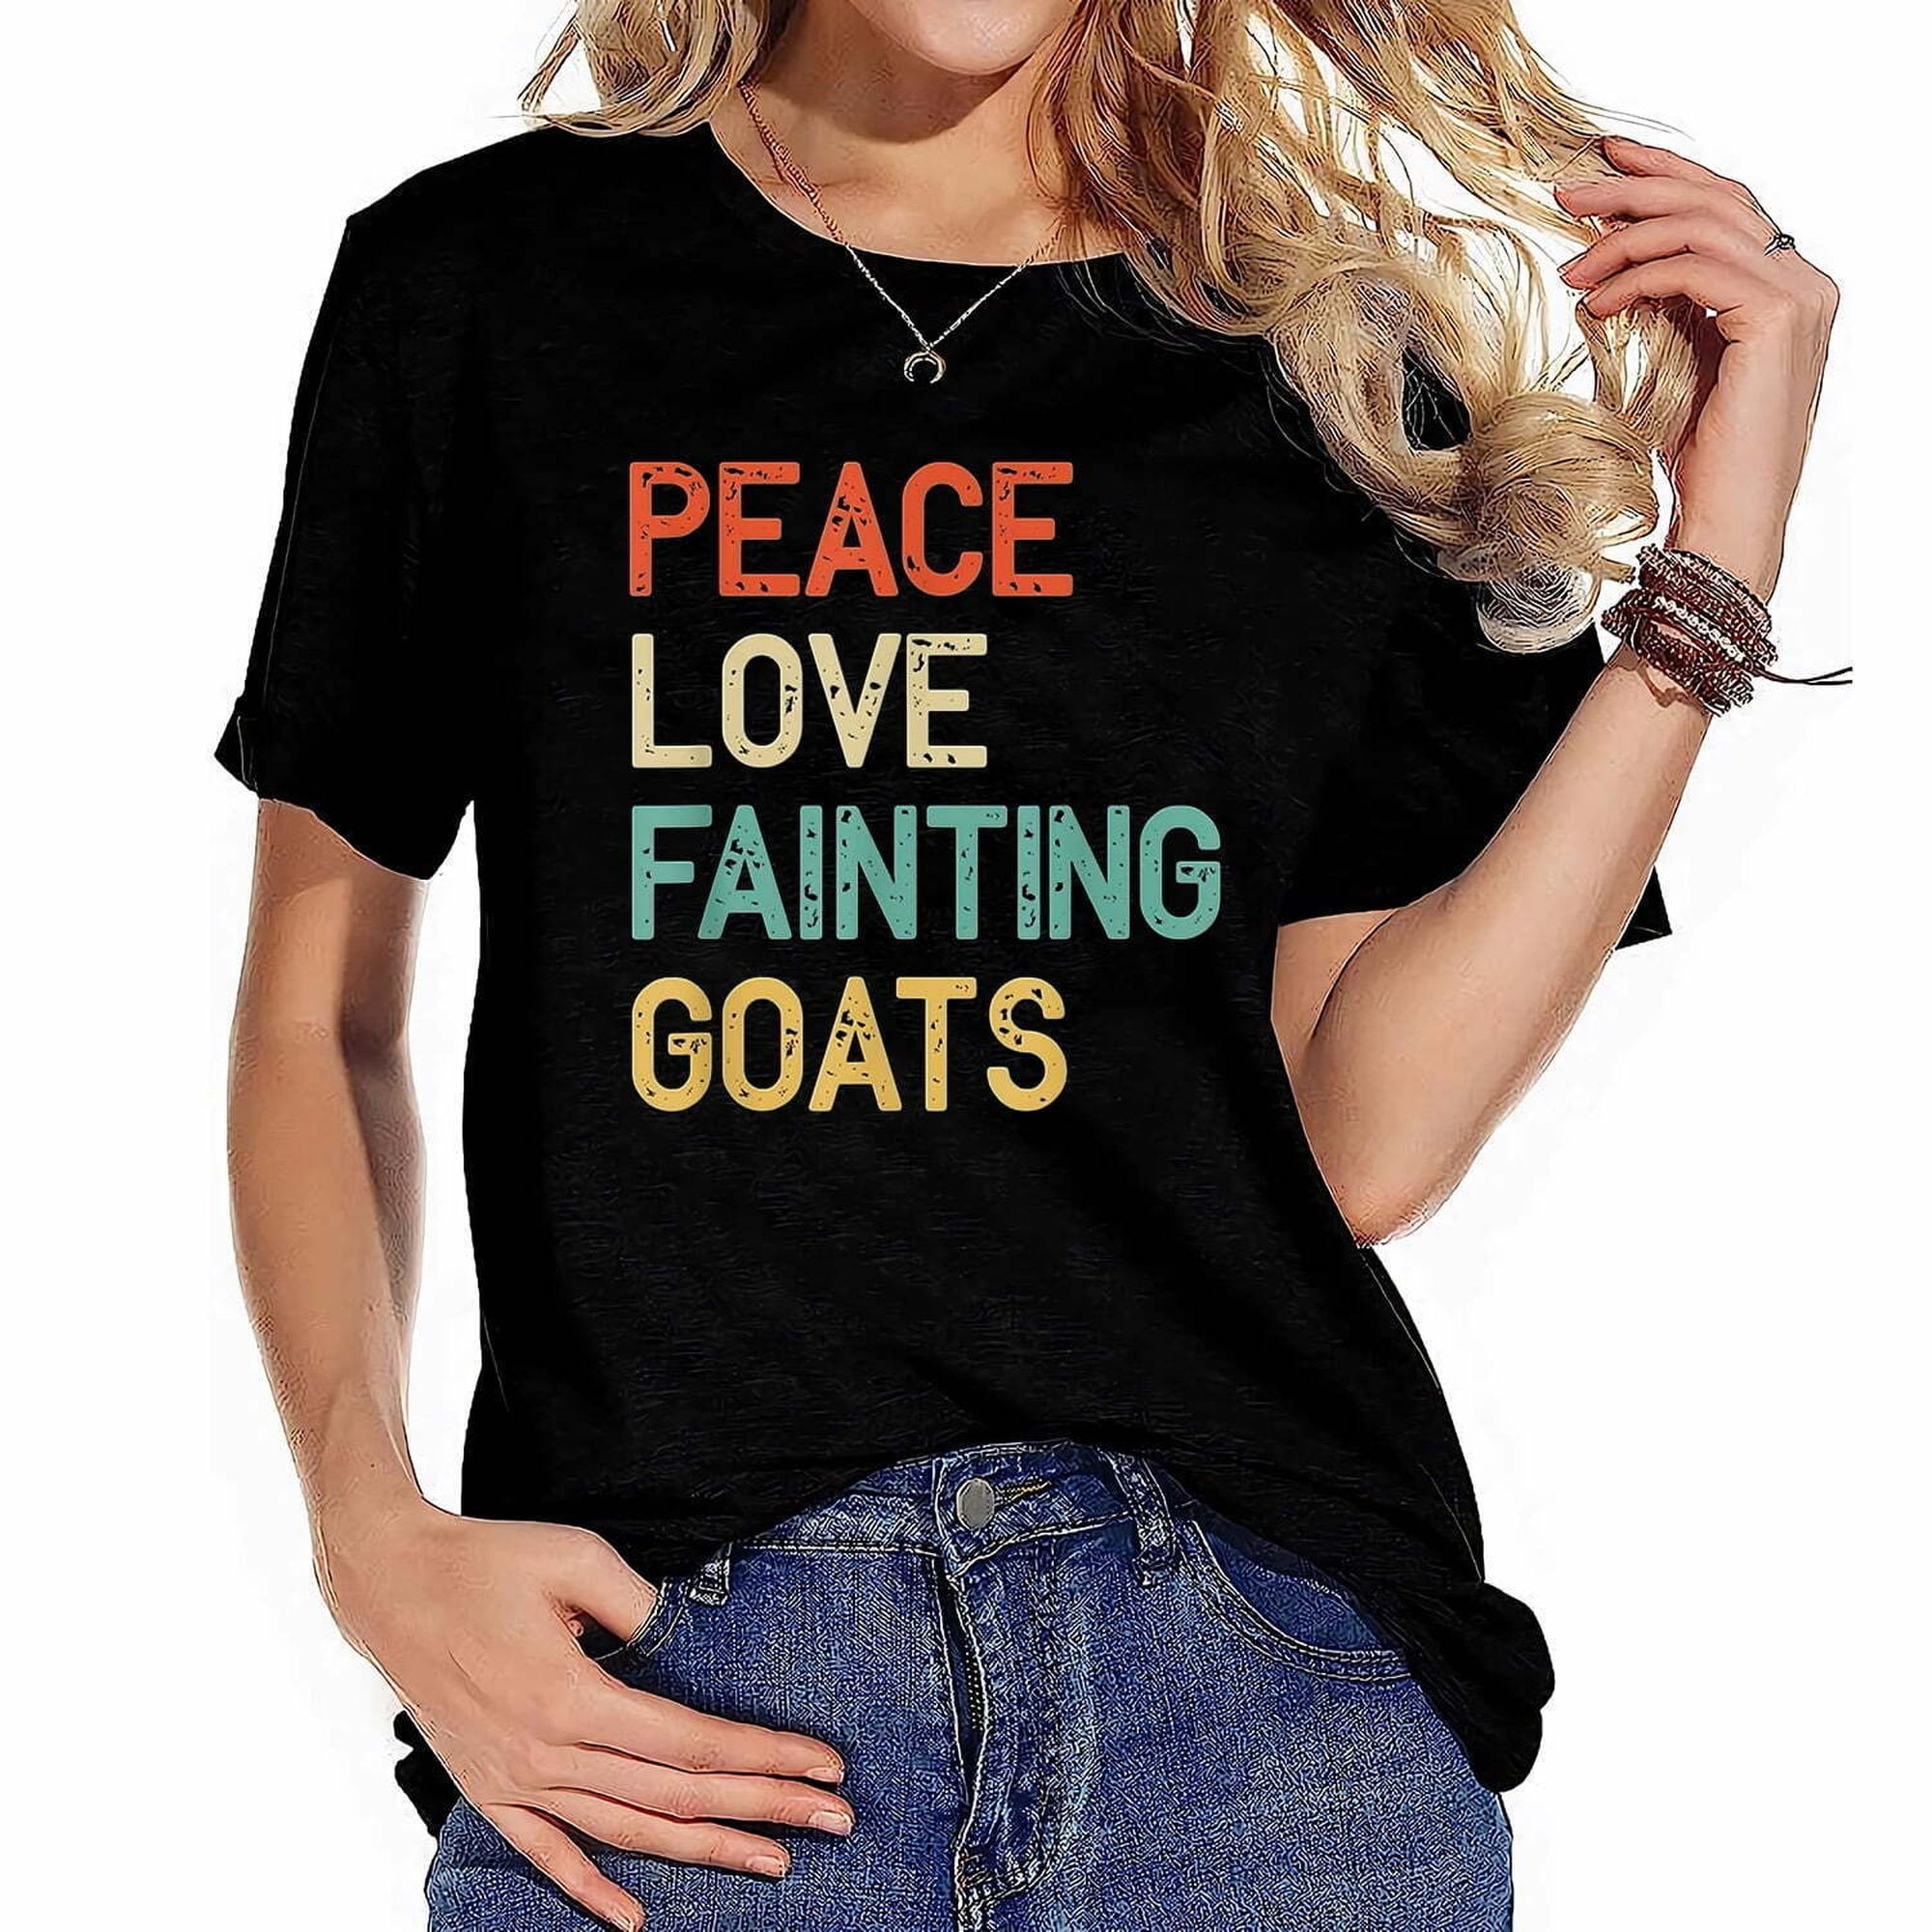 Funny Vintage Goat Shirt: Delightfully Witty Retro Top for Ladies ...